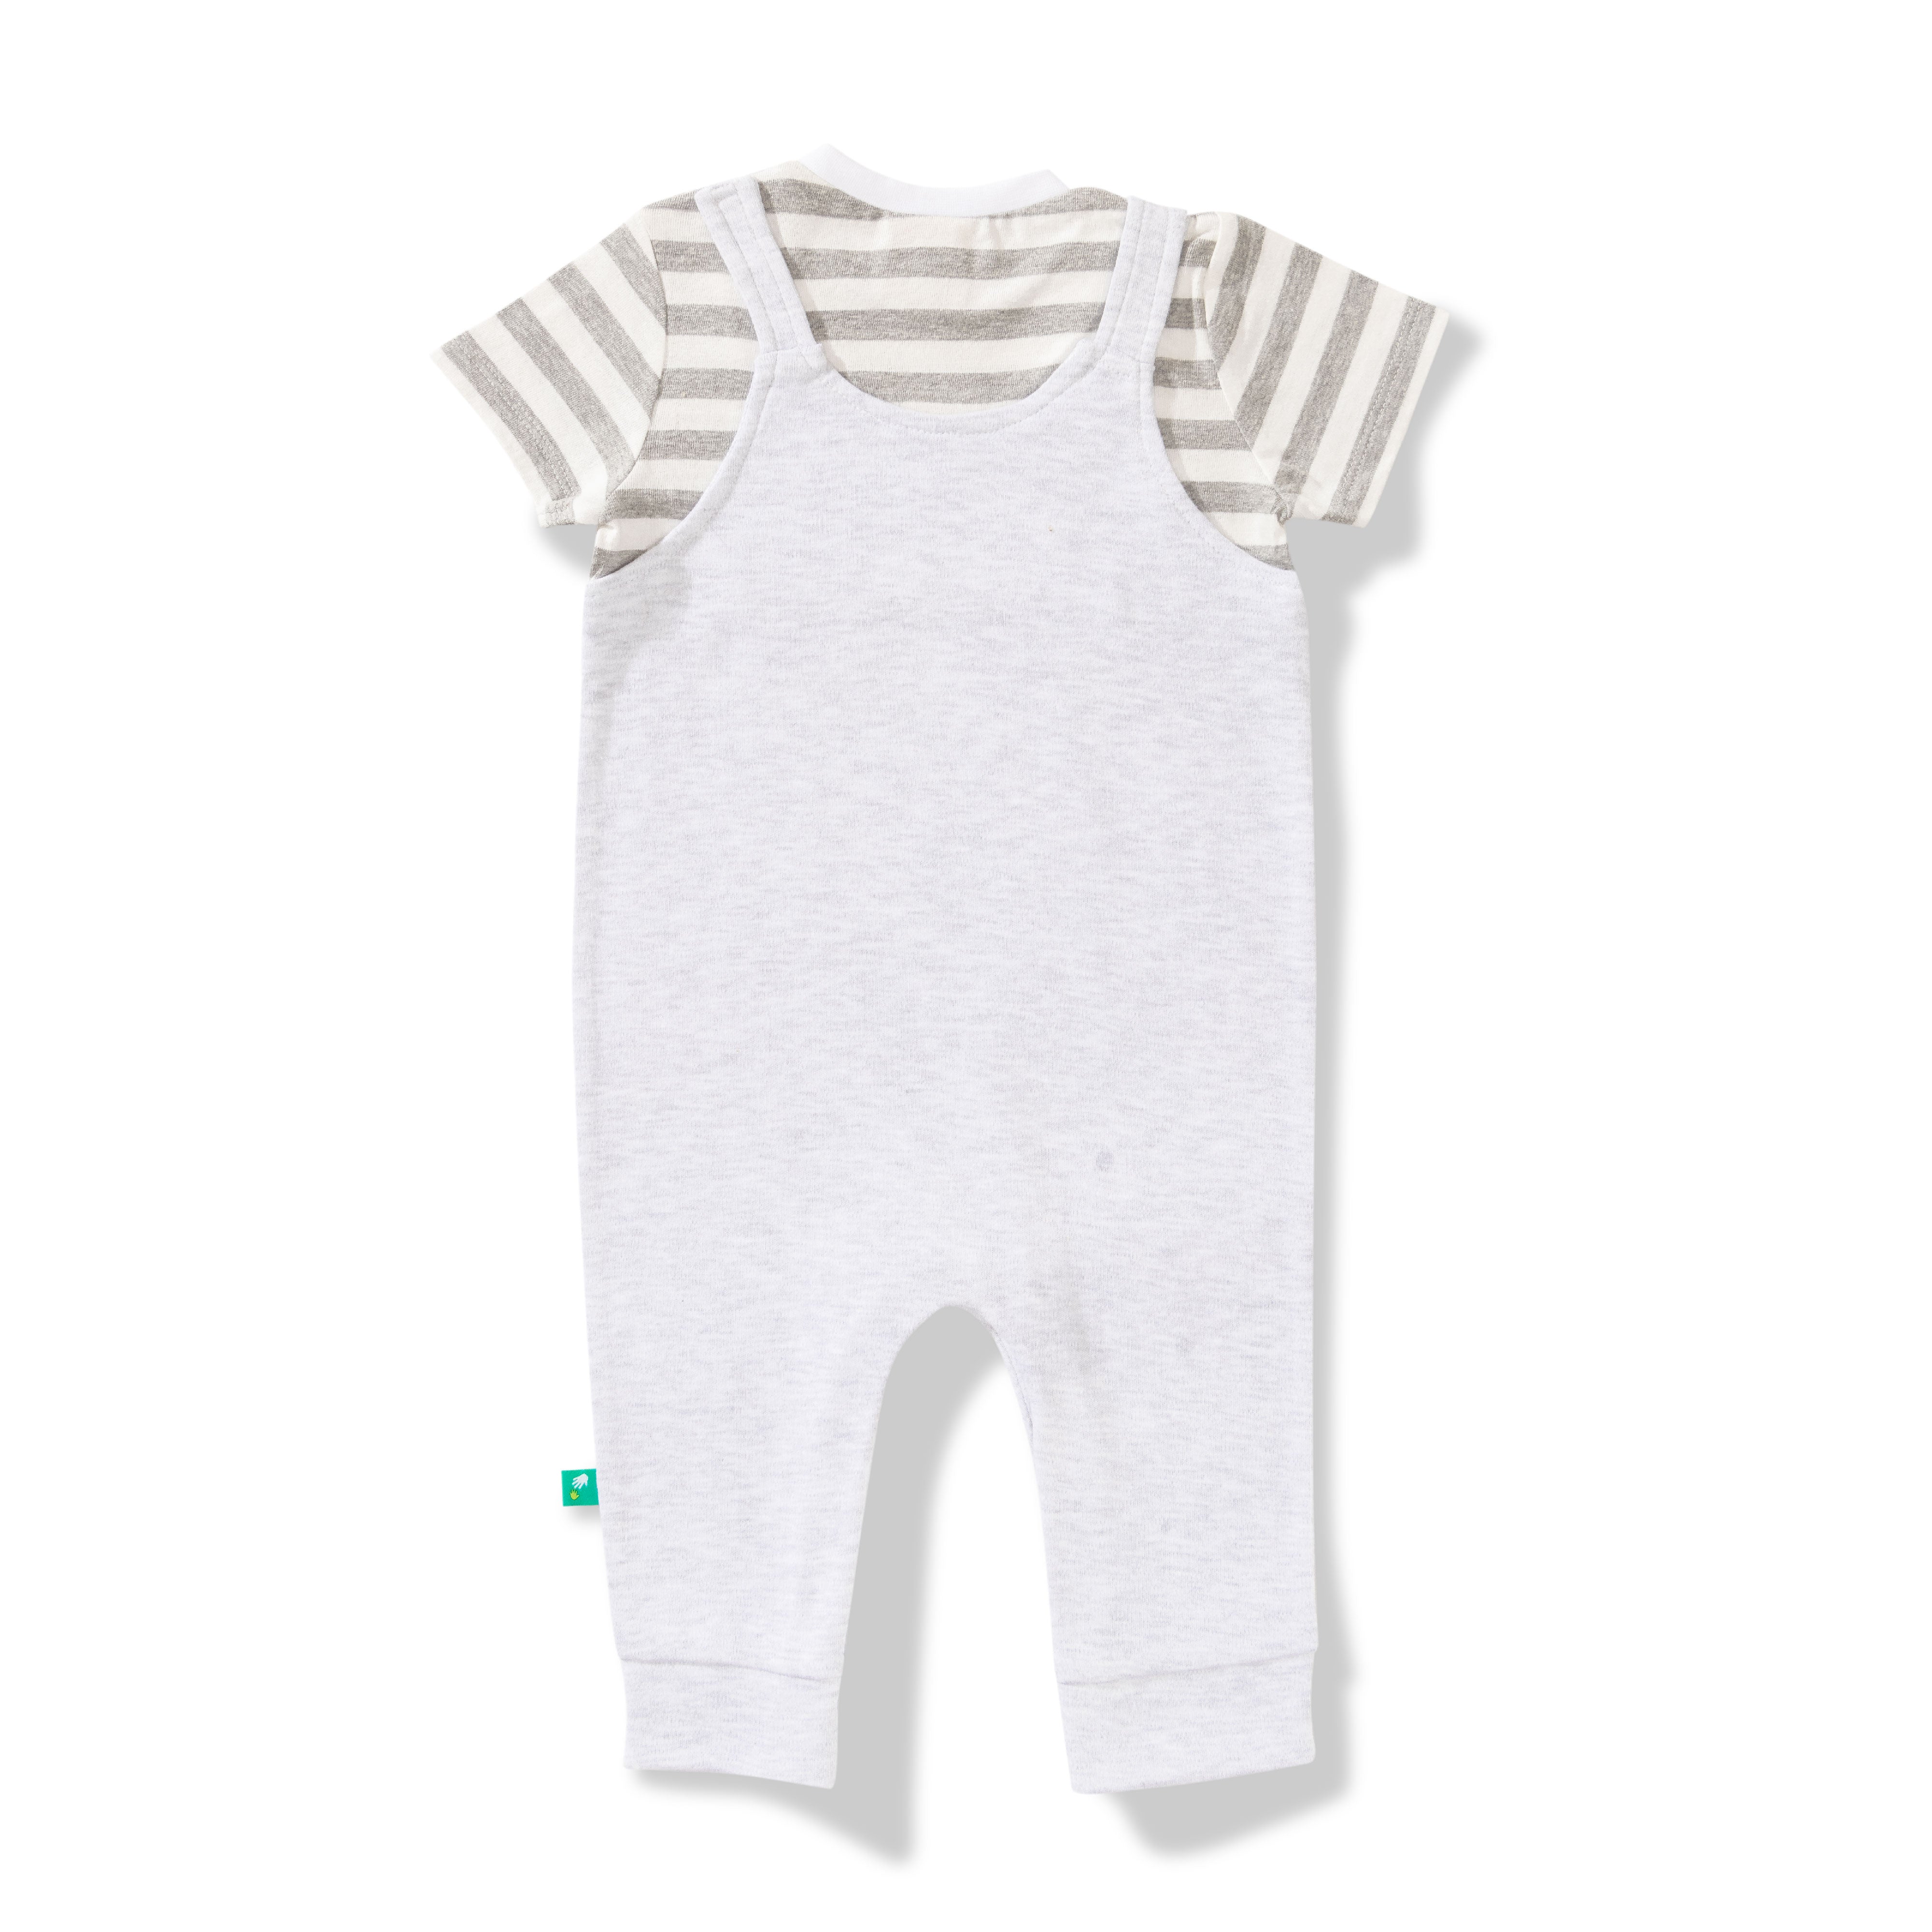 Baby Boys Striped & Graphic Printed Romper